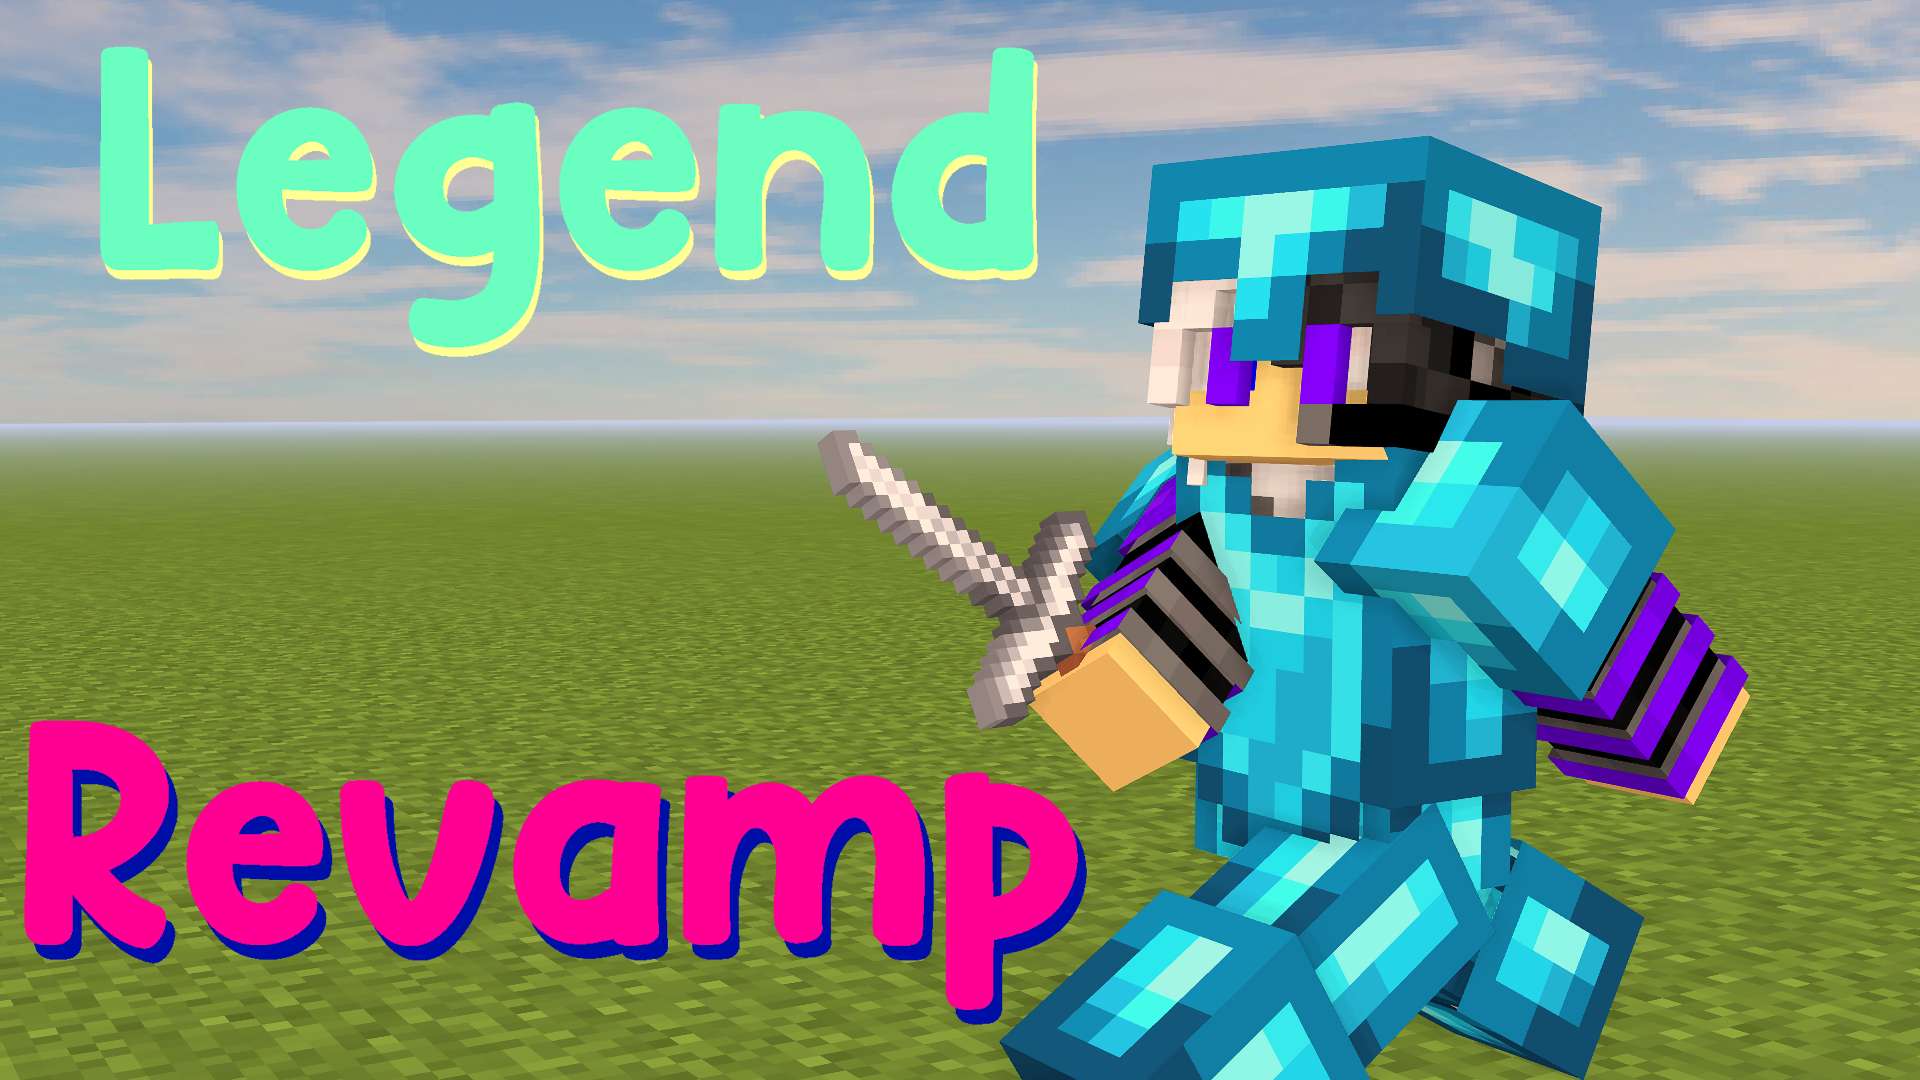 TheLegend27 32x REVAMP 32x by grwdy on PvPRP